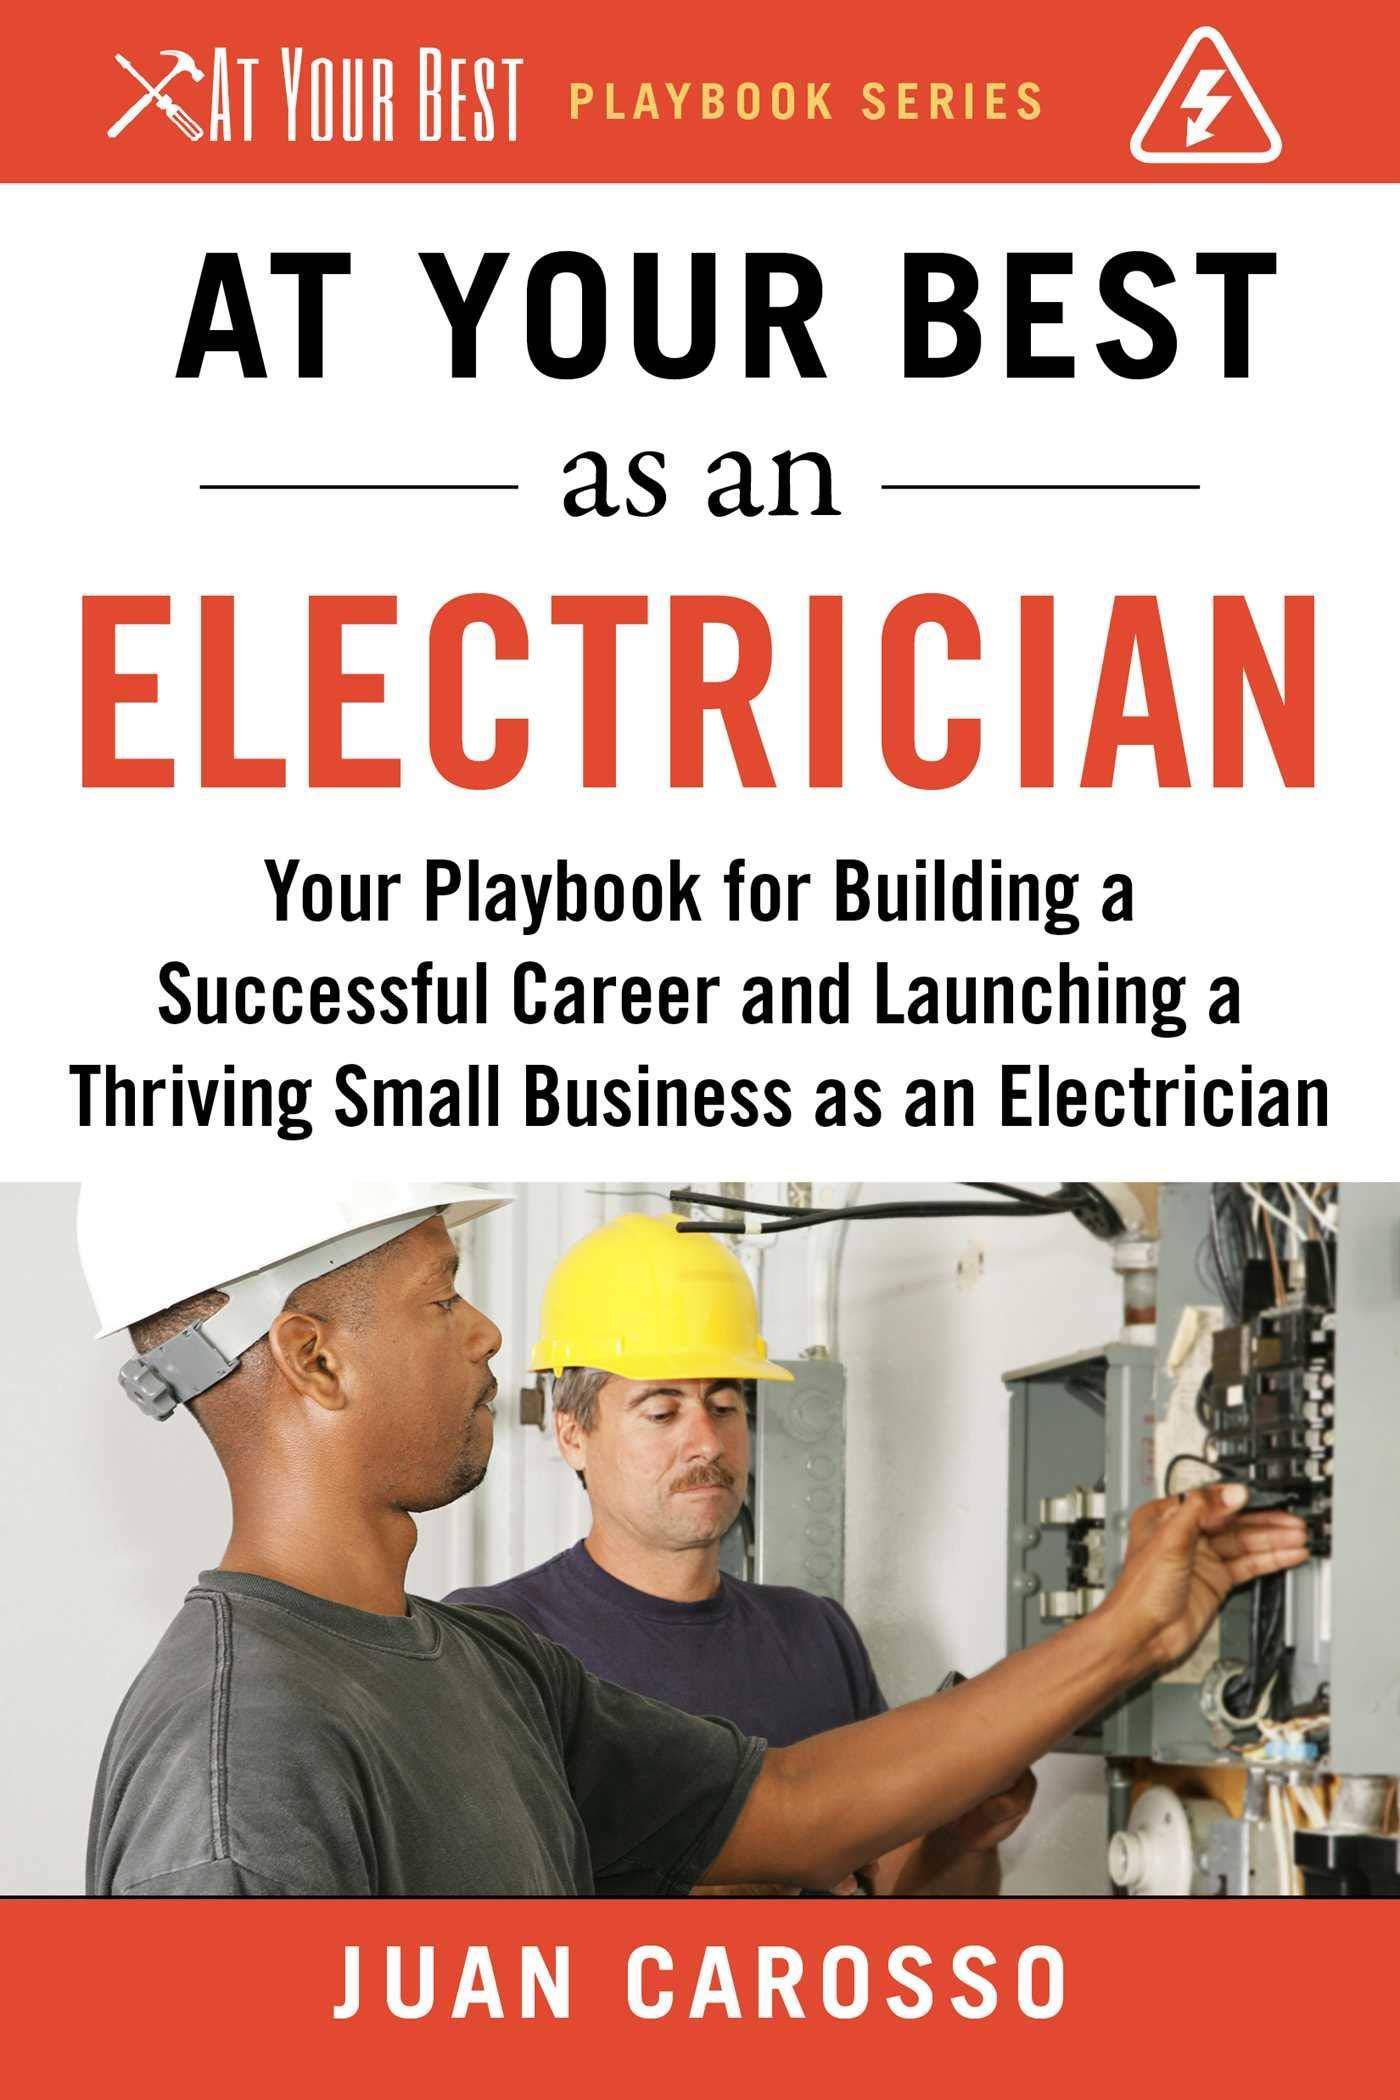 At Your Best as an Electrician: Your Playbook for Building a Suc - SureShot Books Publishing LLC